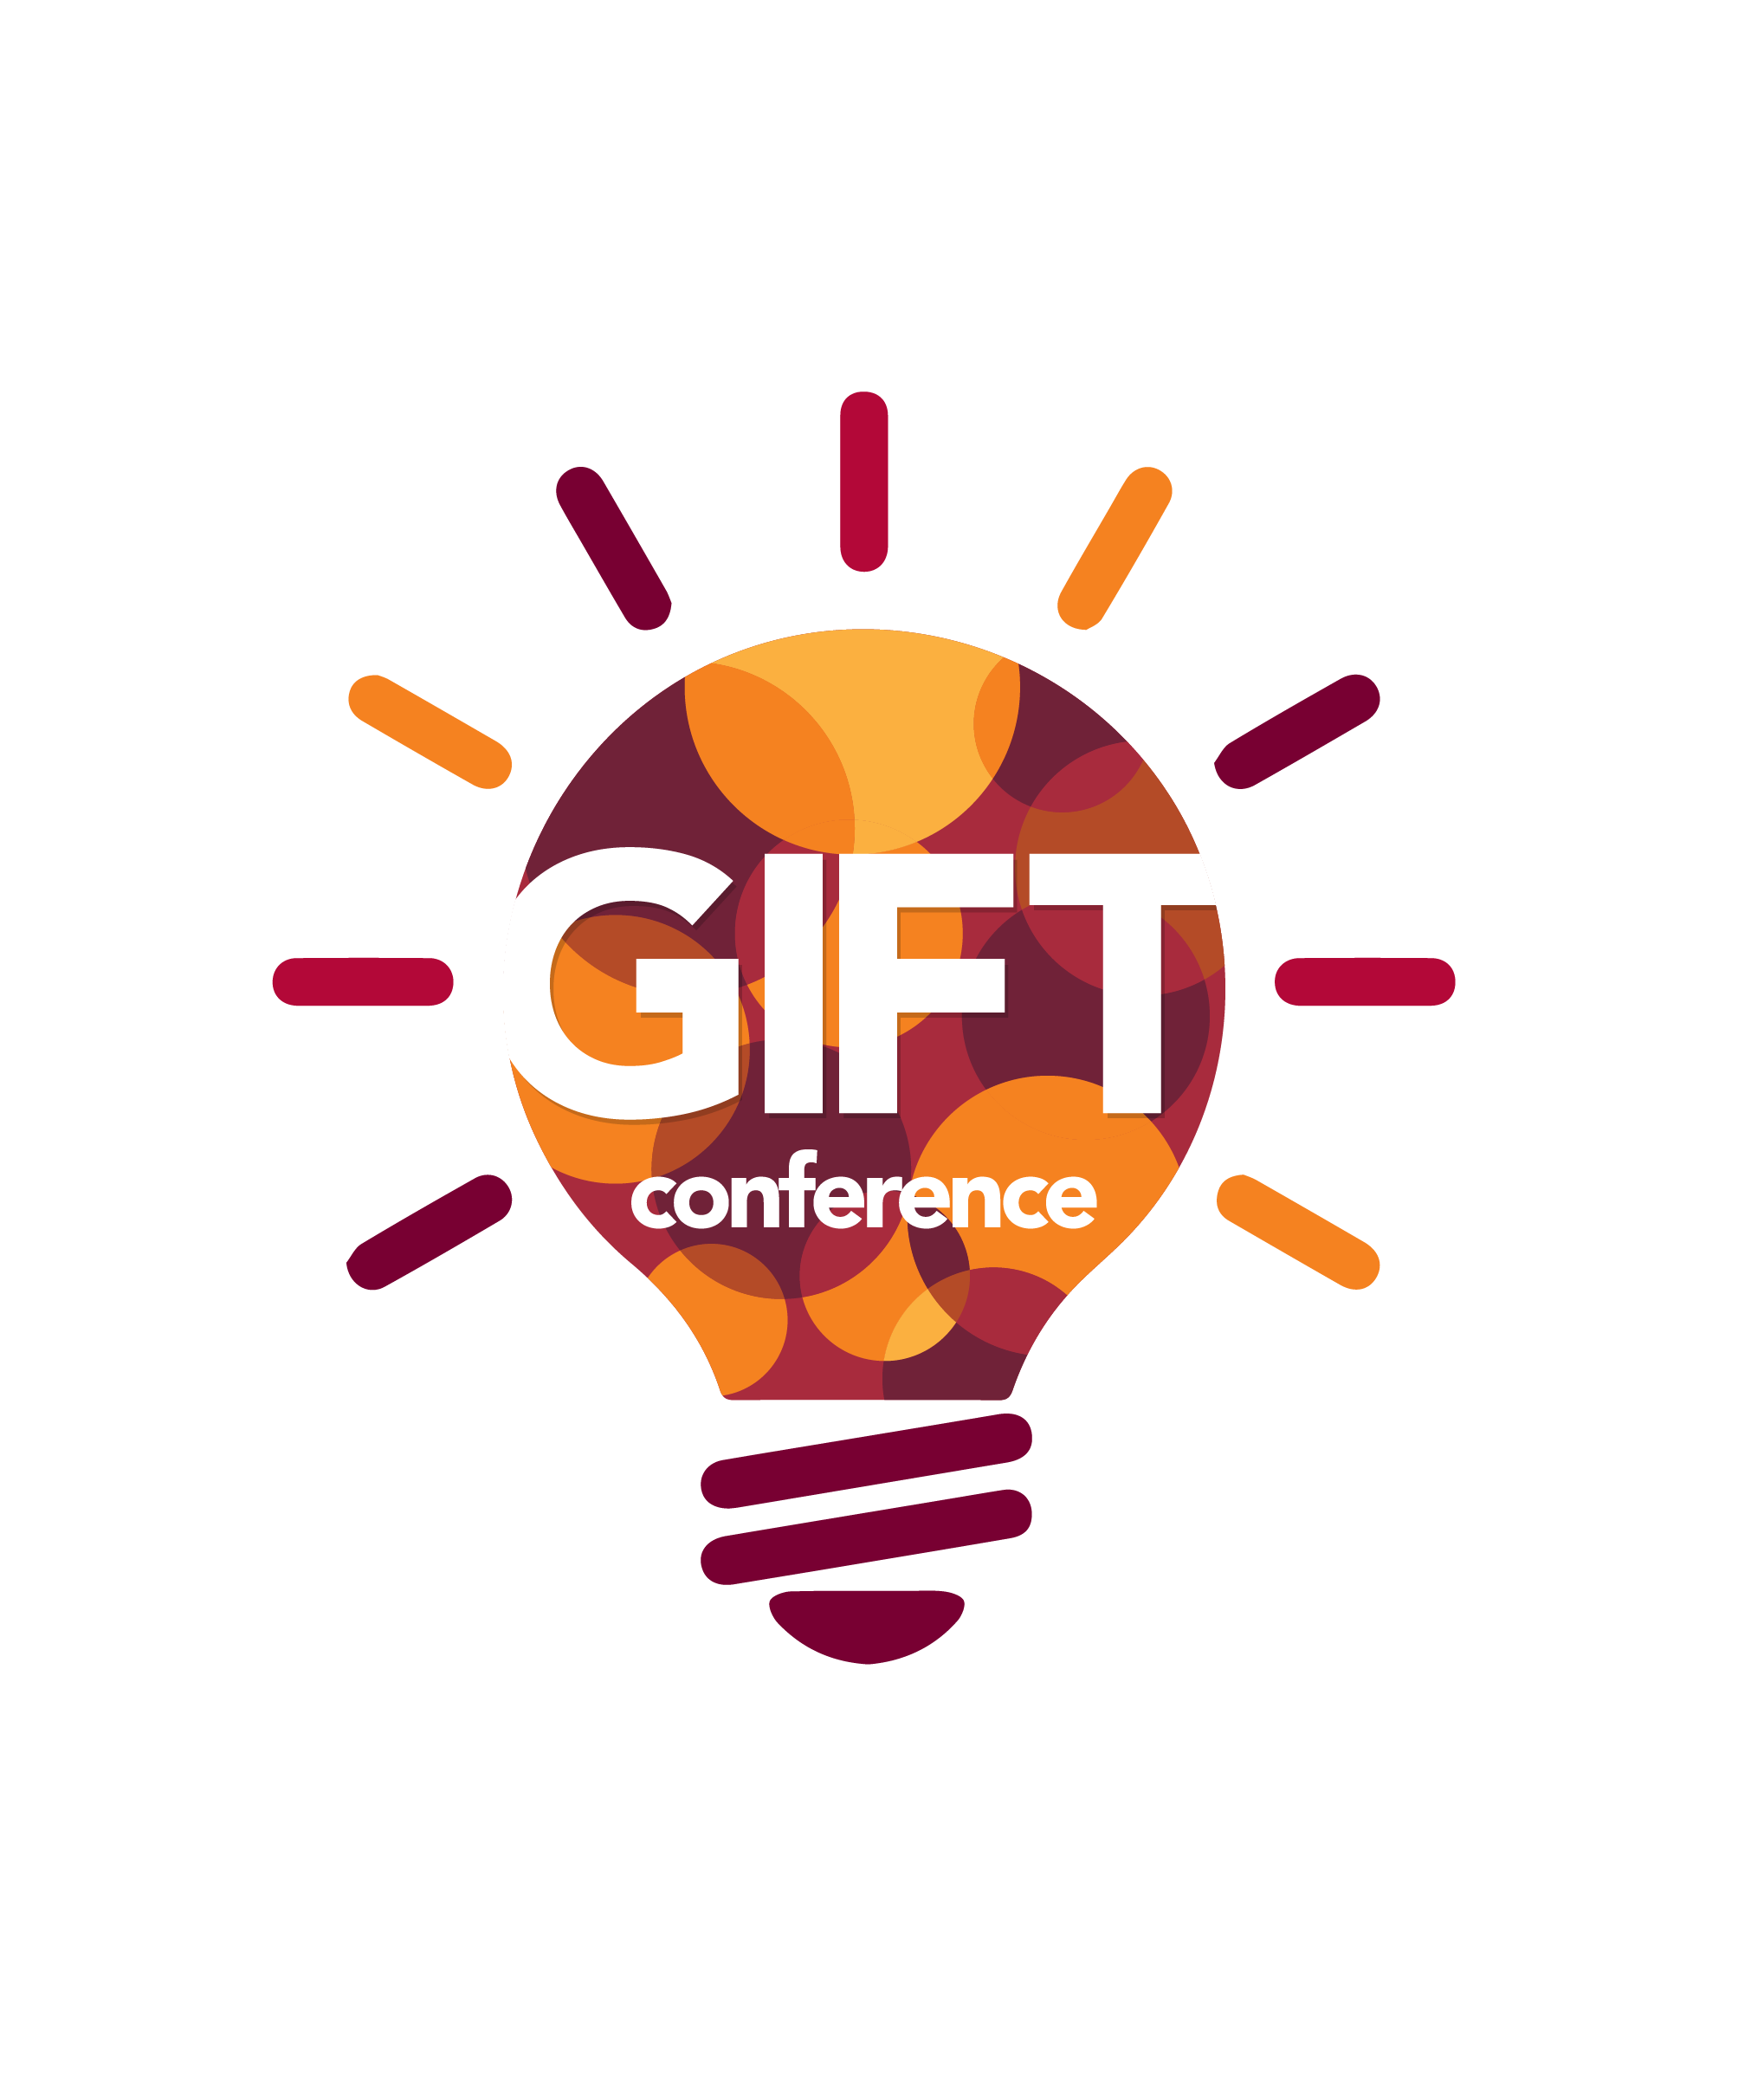 Gift Conference Logo - links to website